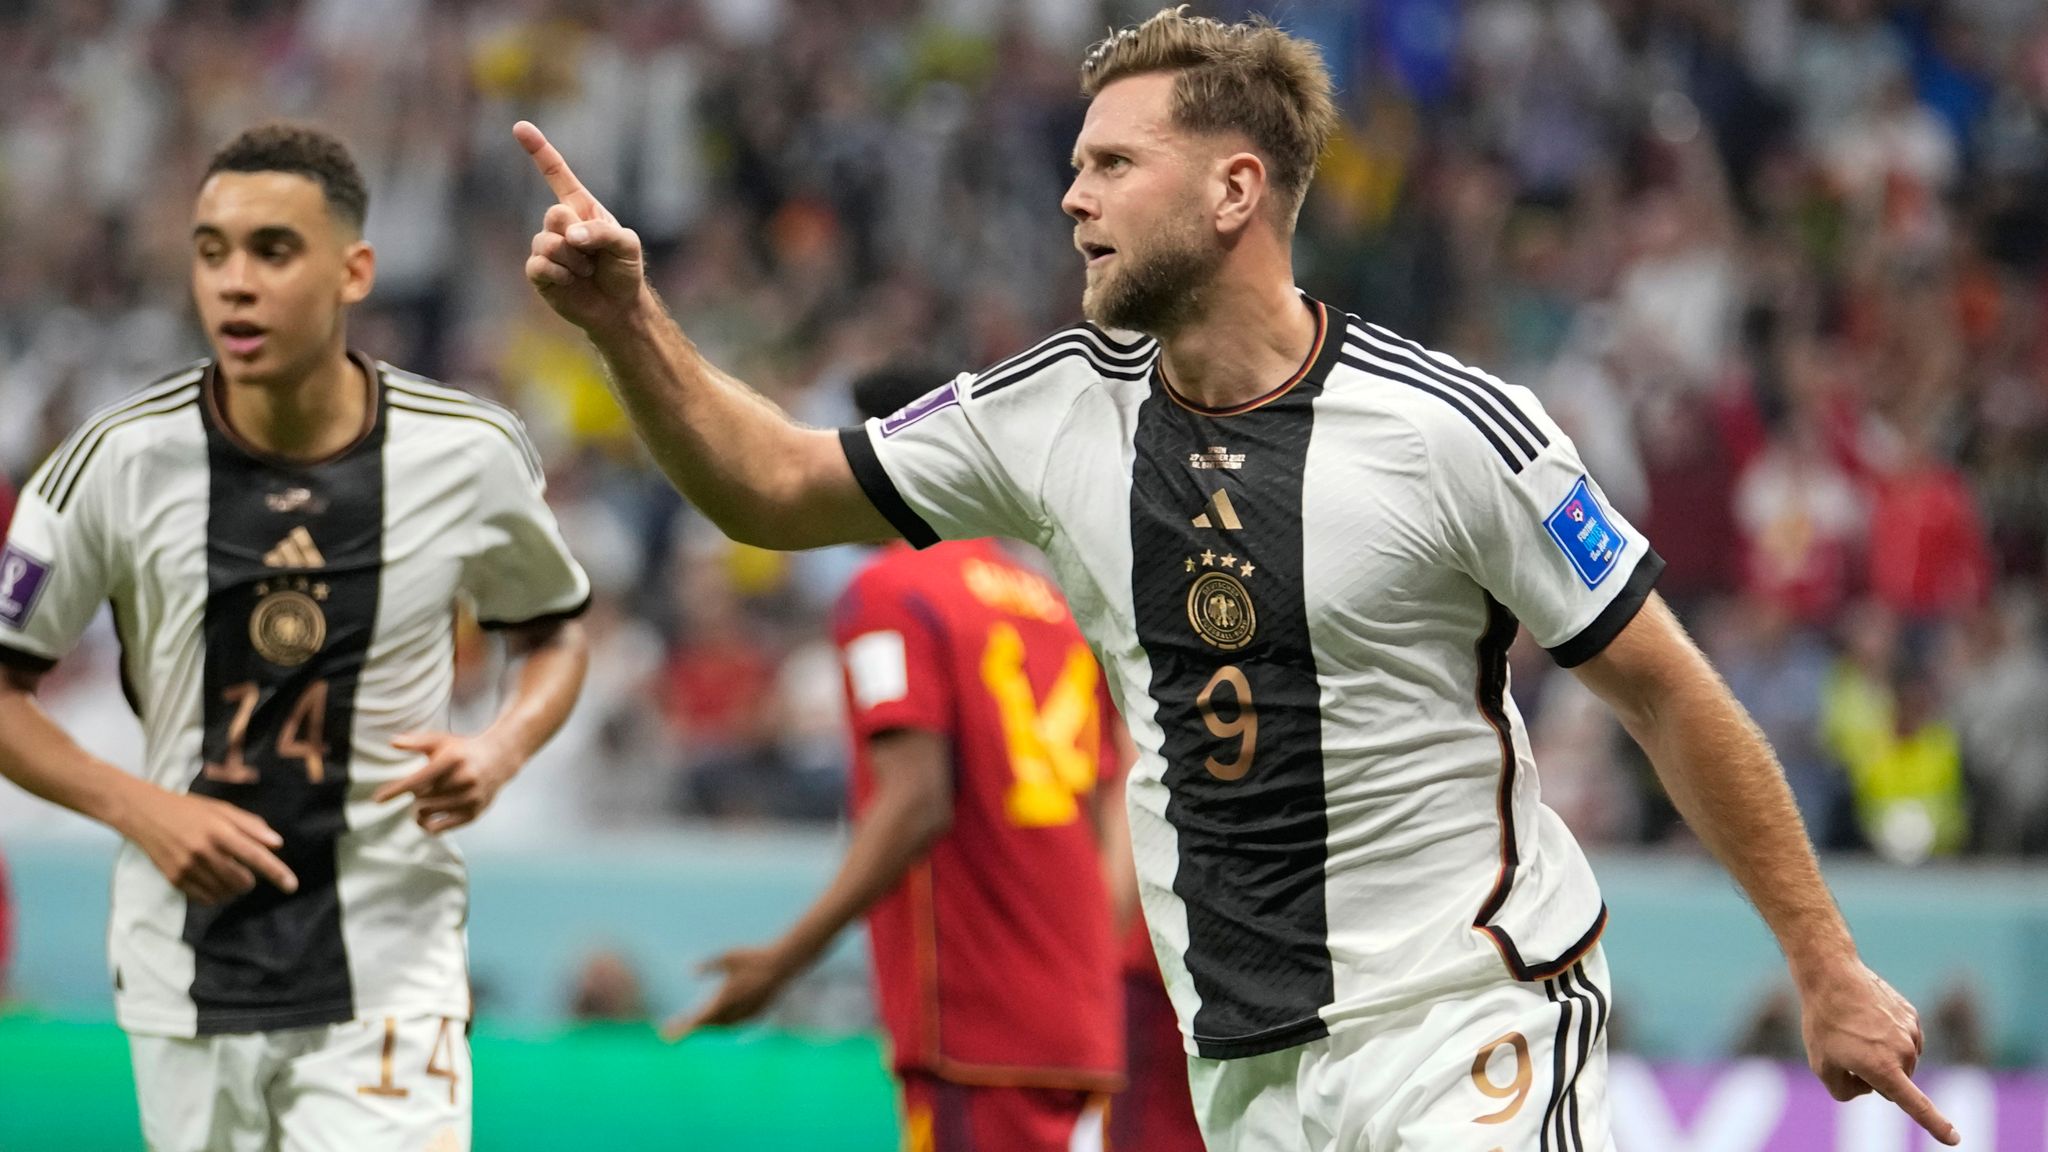 Spain 1-1 Germany: Niclas Fullkrug equaliser cancels out Alvaro Morata goal as World Cup Group E goes to wire | Football News | Sky Sports